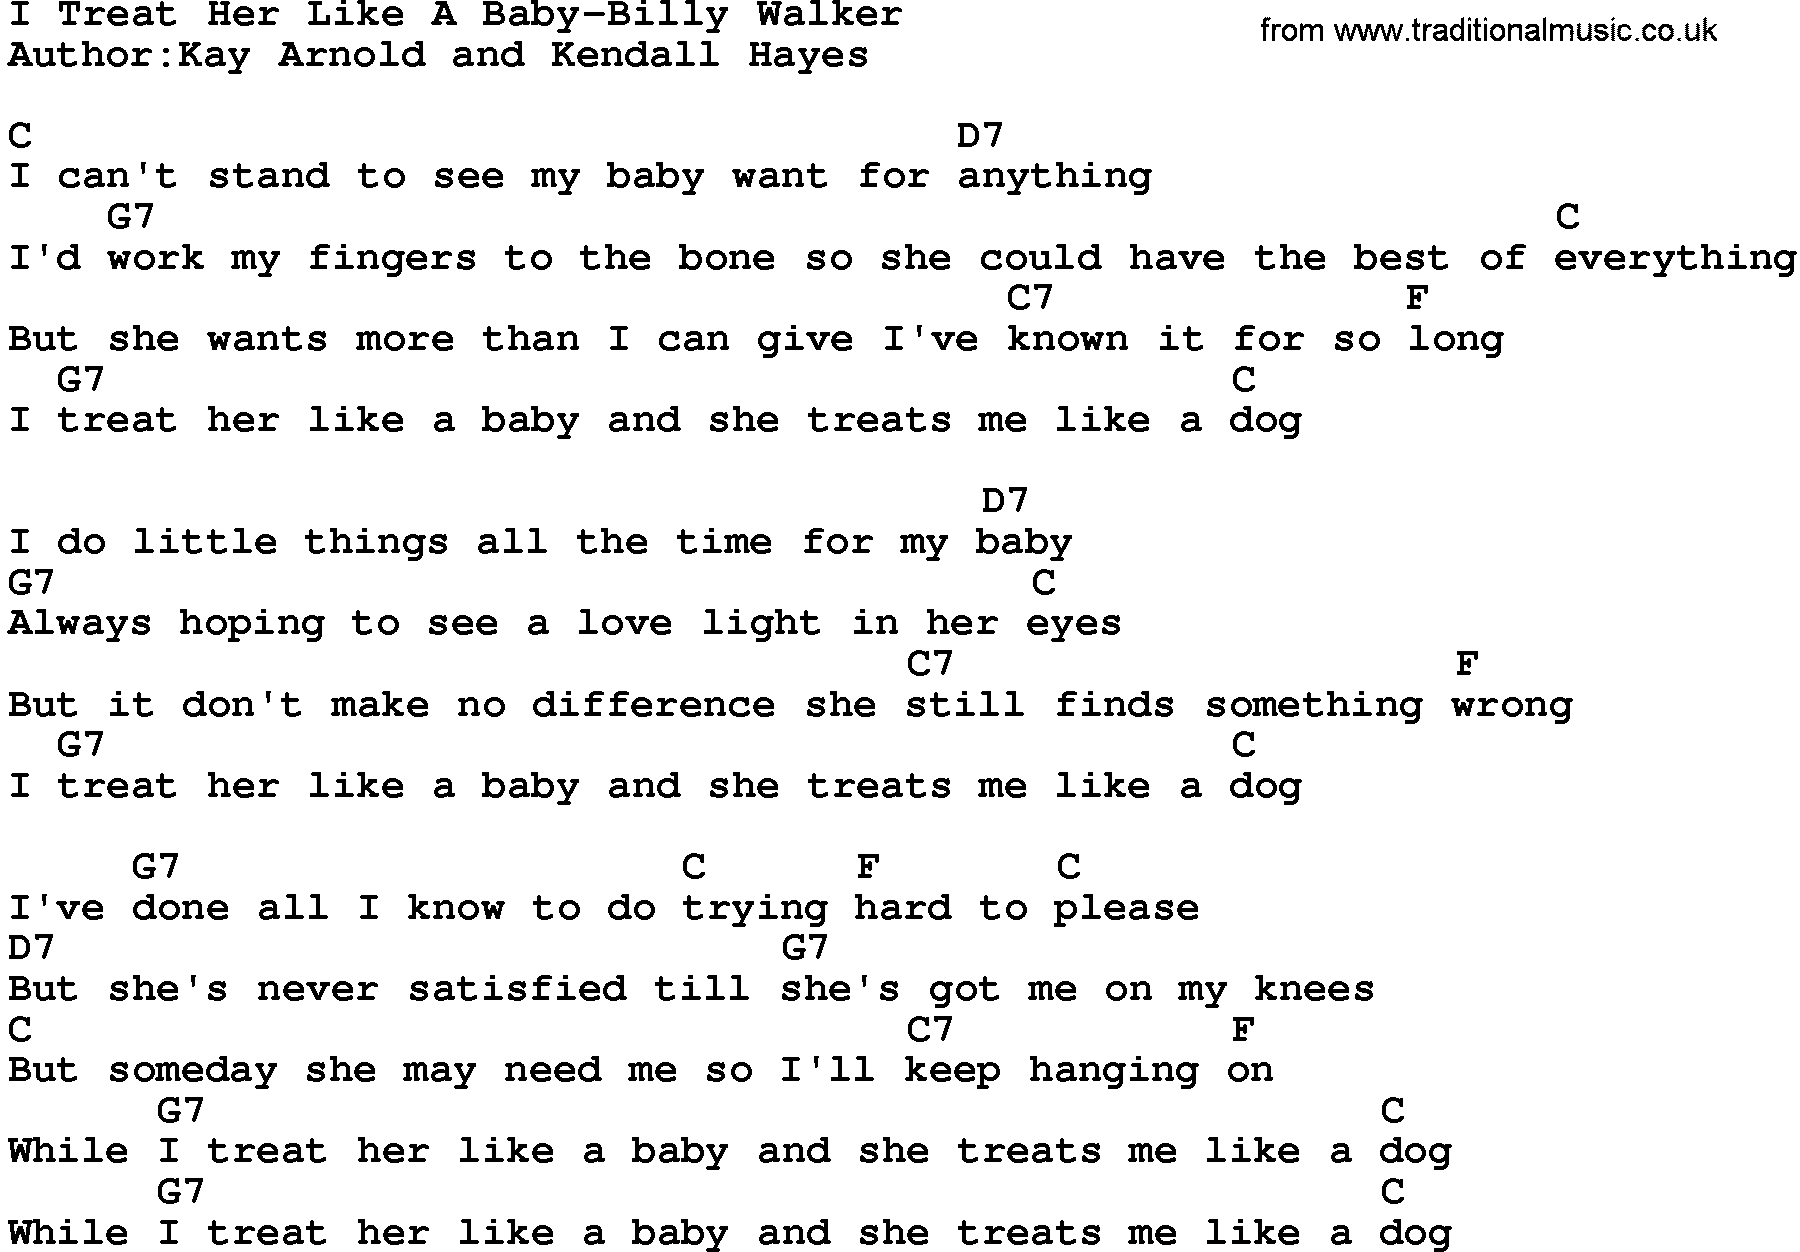 Country music song: I Treat Her Like A Baby-Billy Walker lyrics and chords